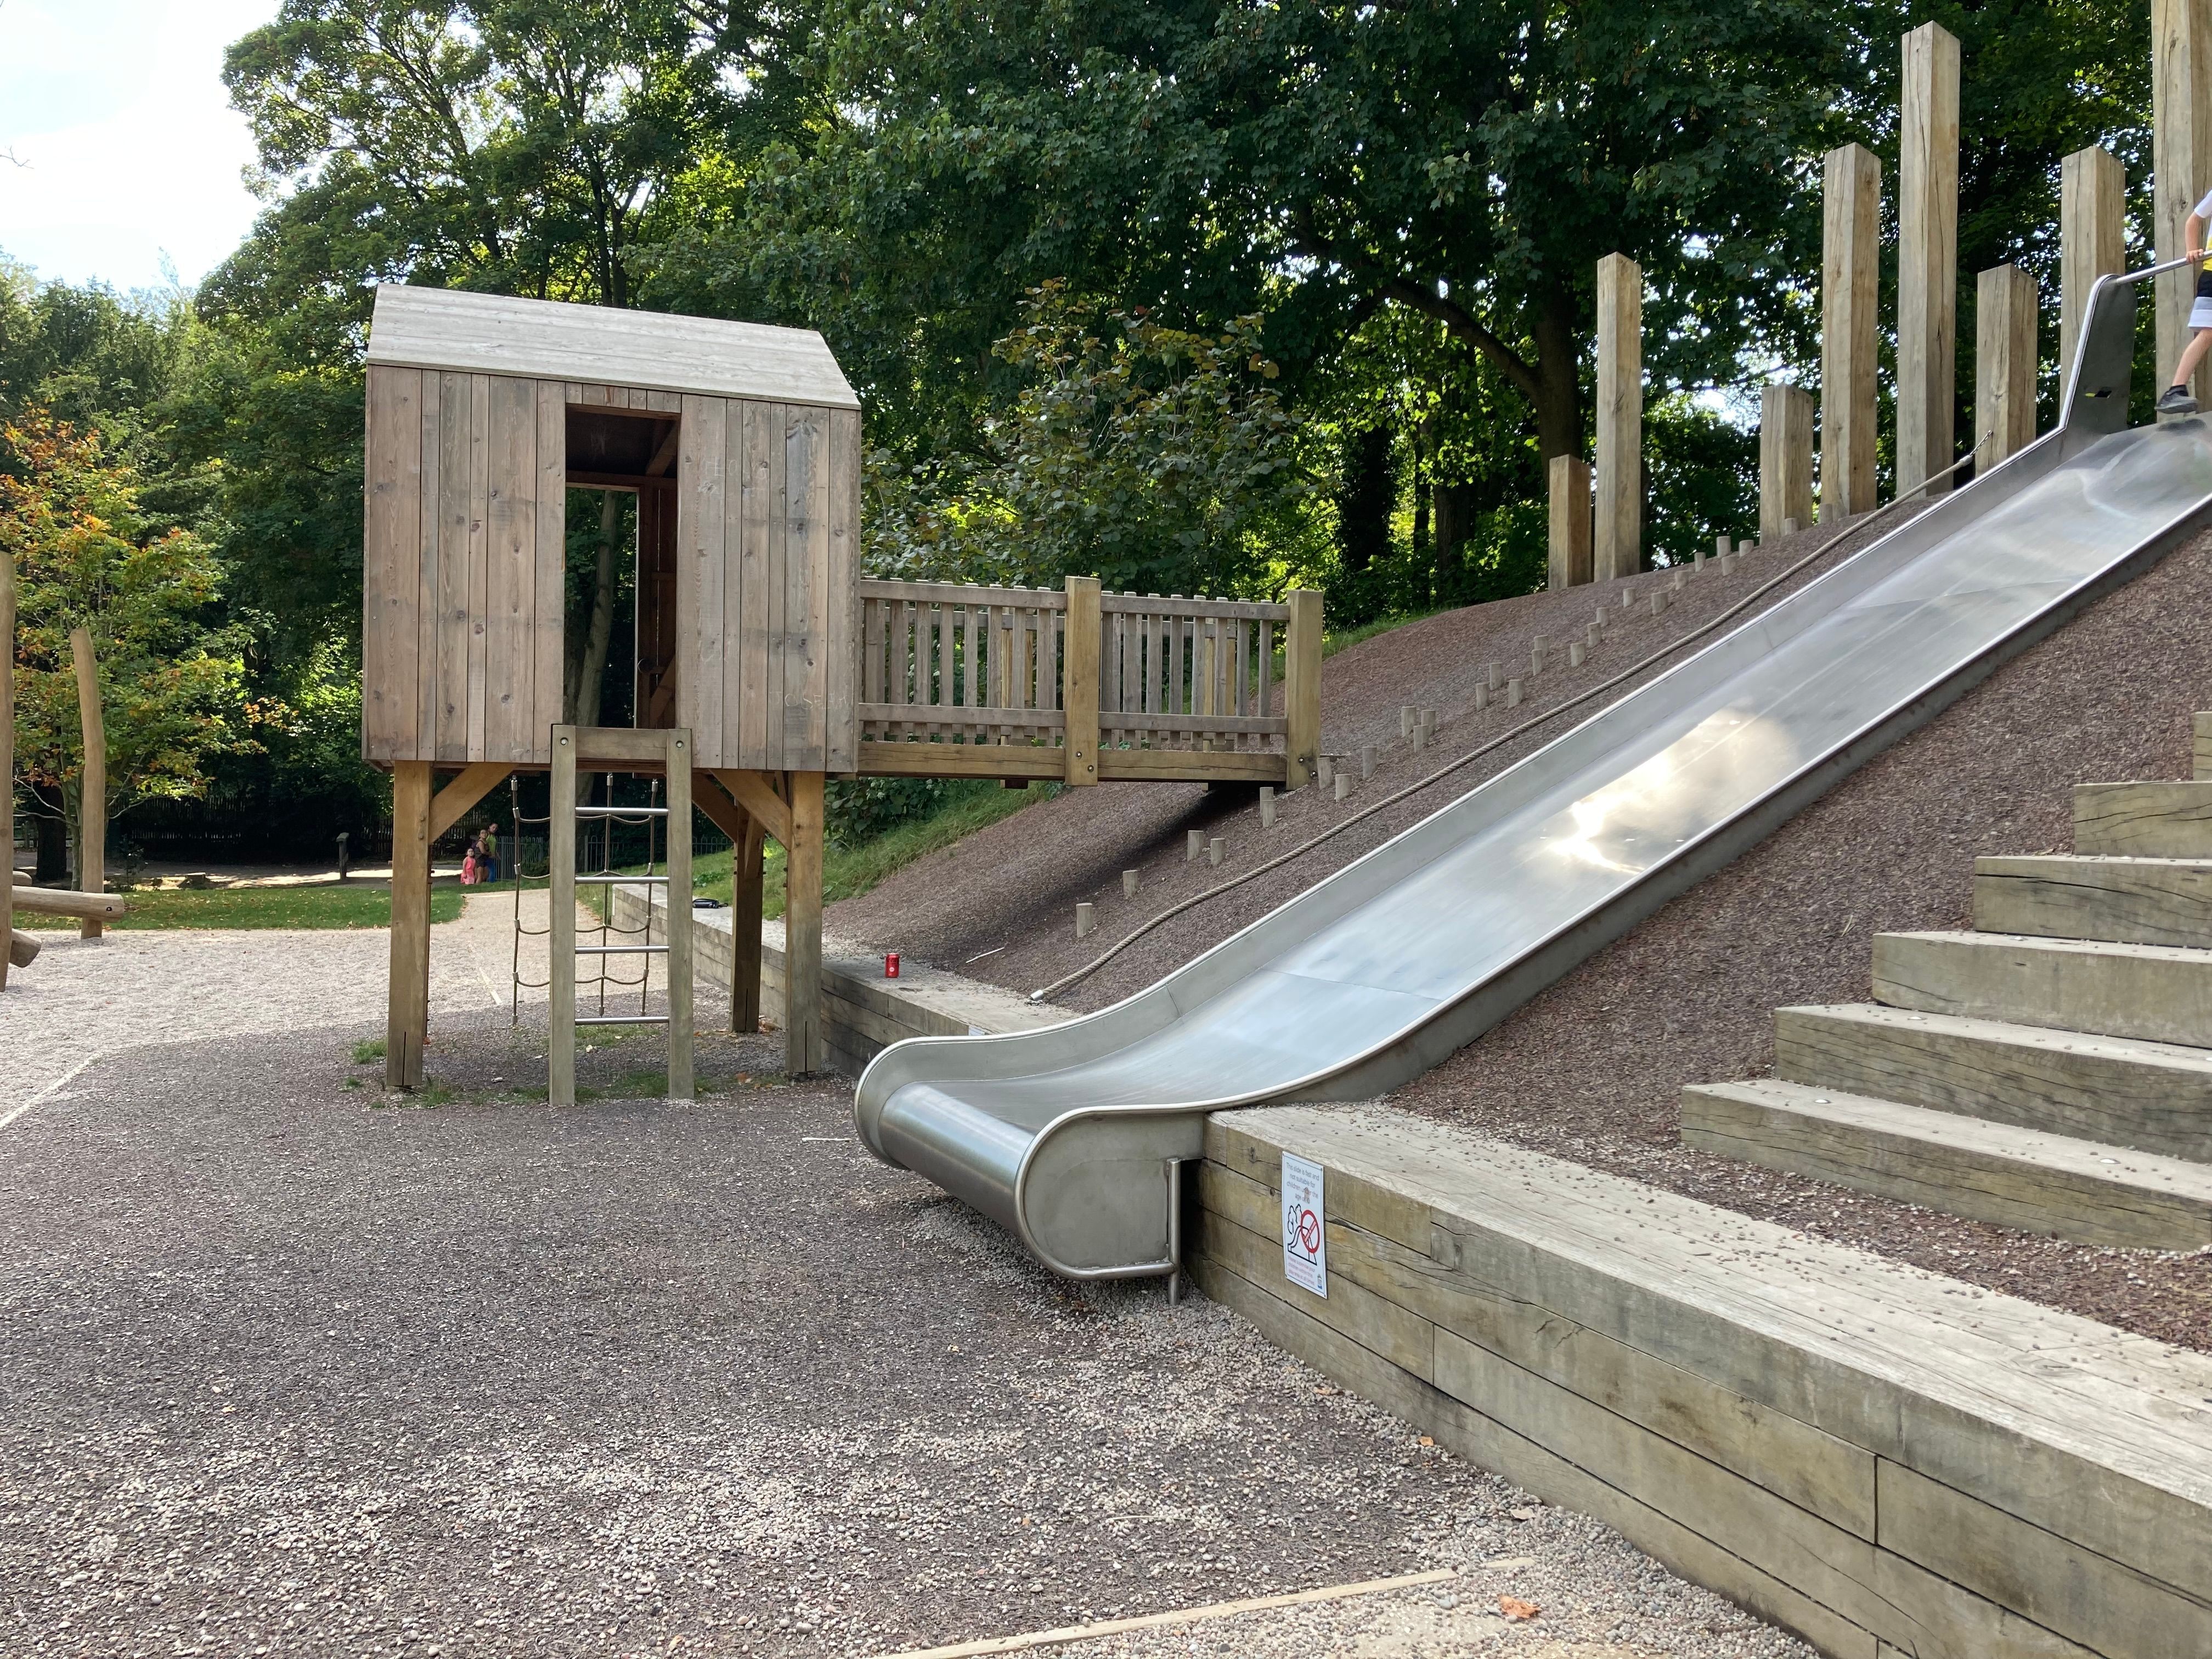 The play area at Russell gardens, the long fast slide and little house